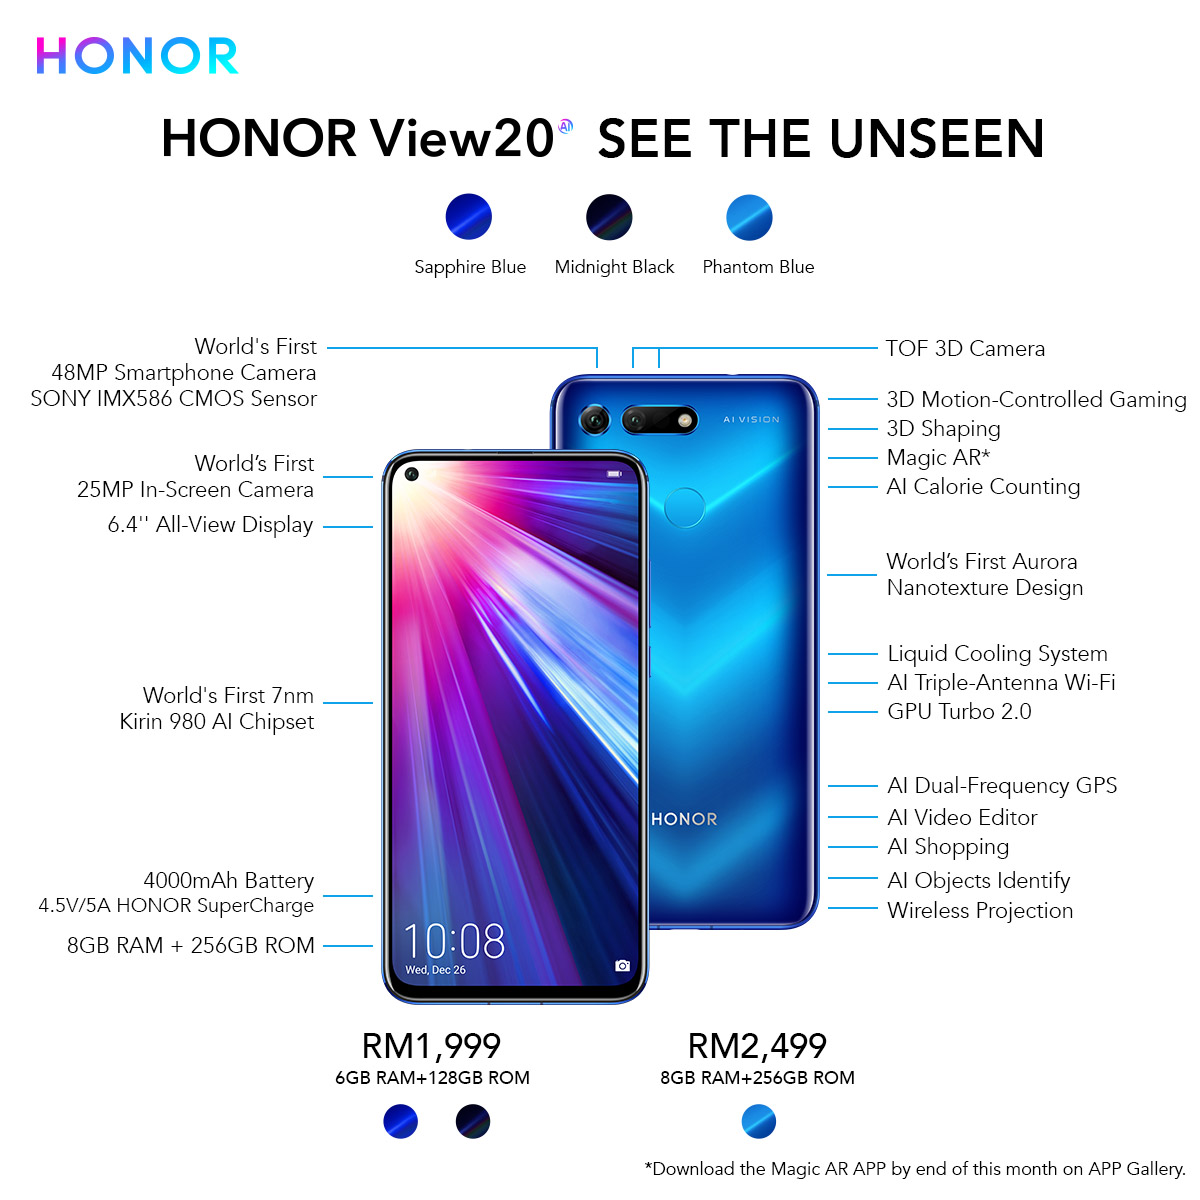 The uber powerful HONOR View20 priced at RM1,999 and coming to Malaysia 6